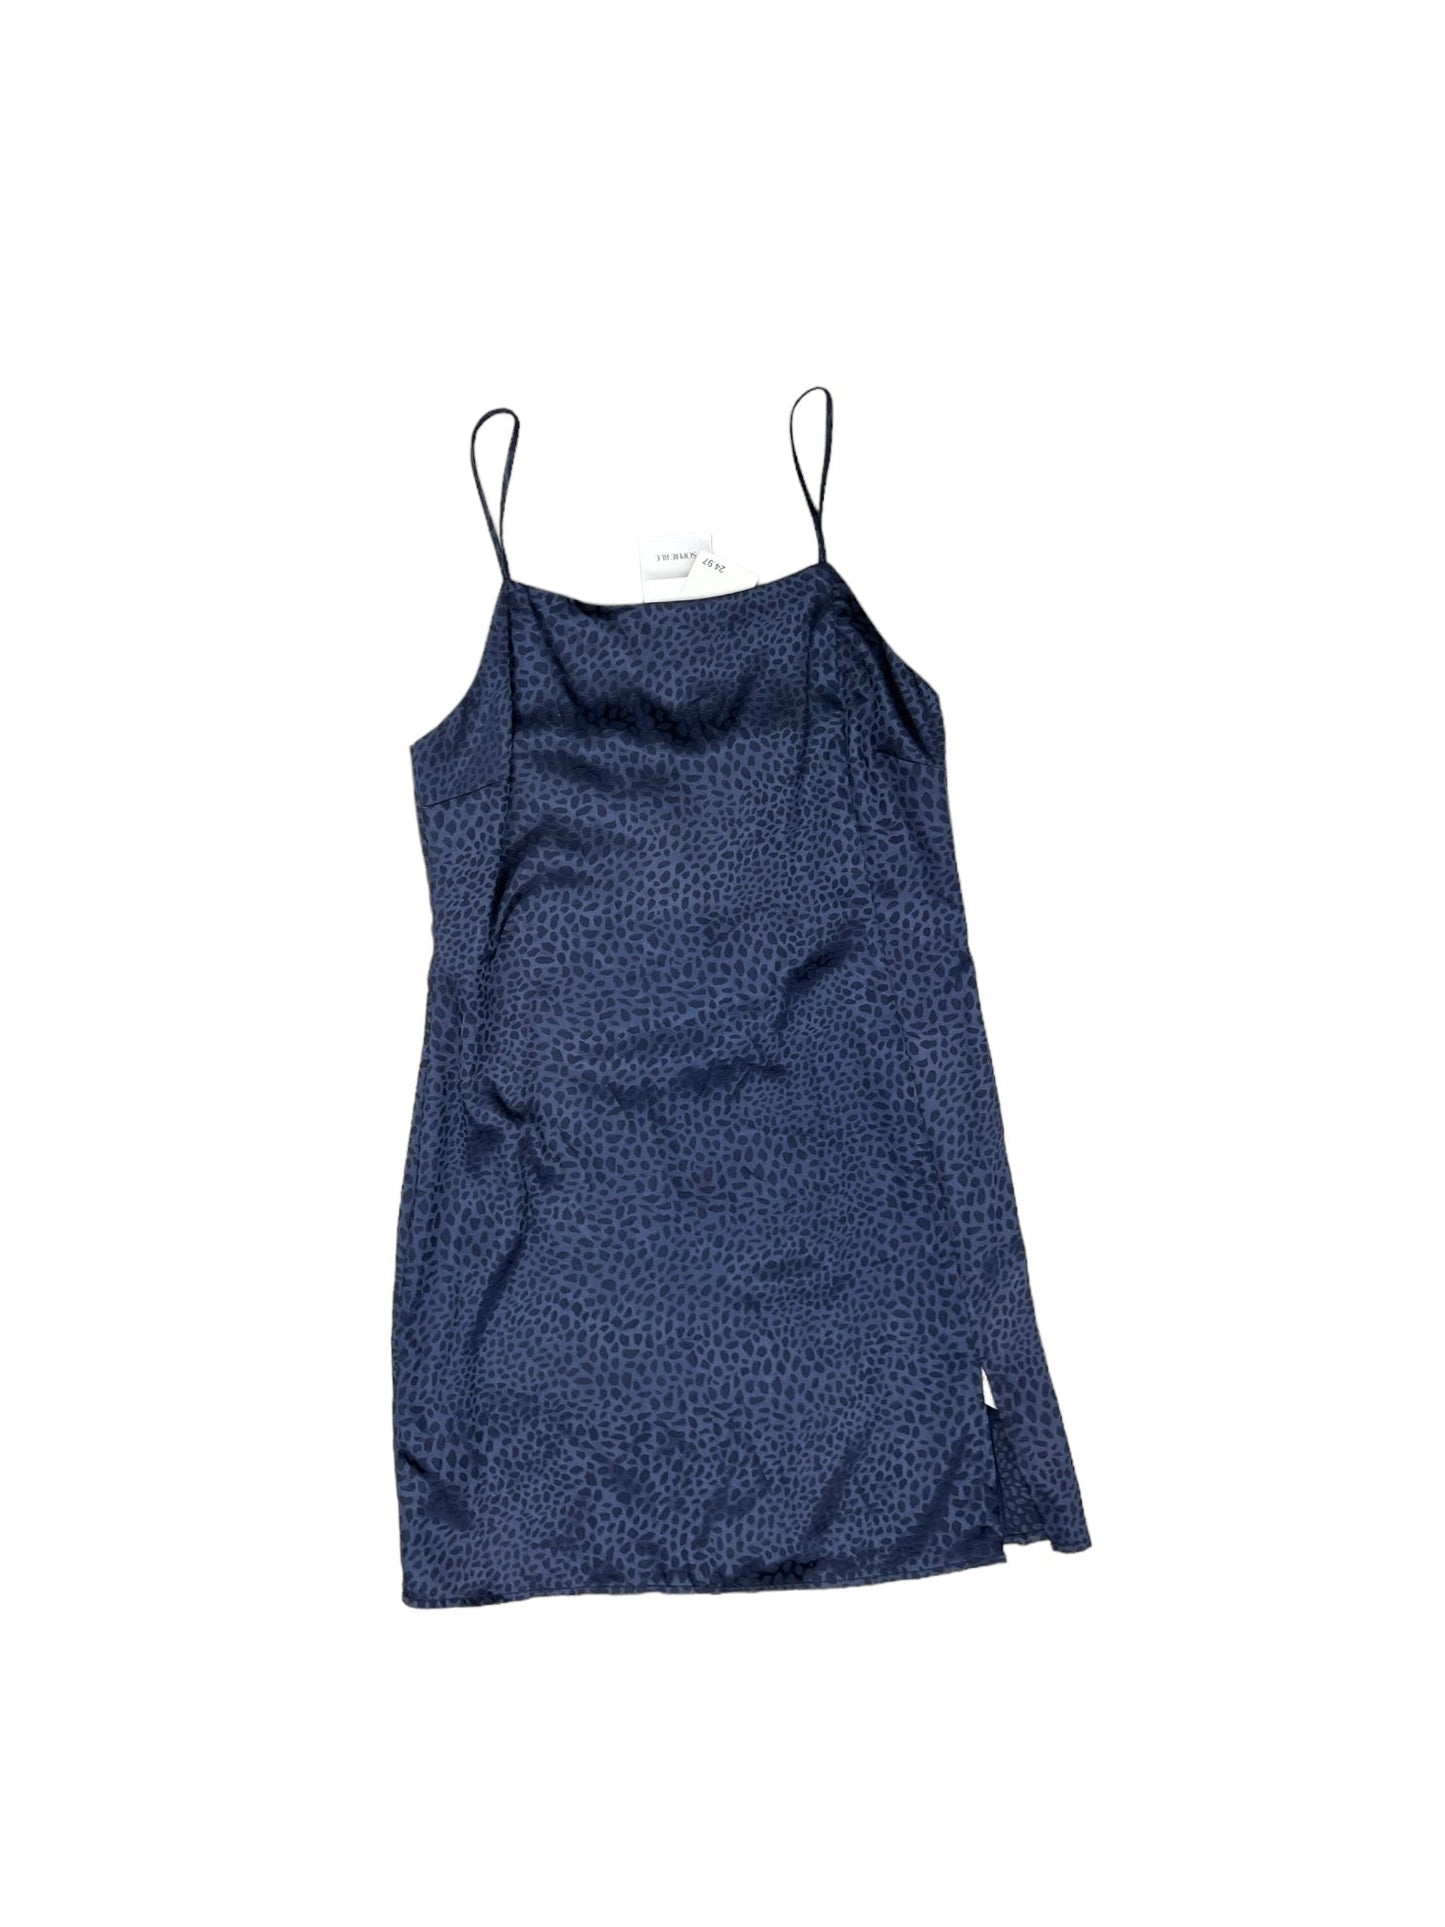 Navy Dress Party Short Nordstrom, Size S